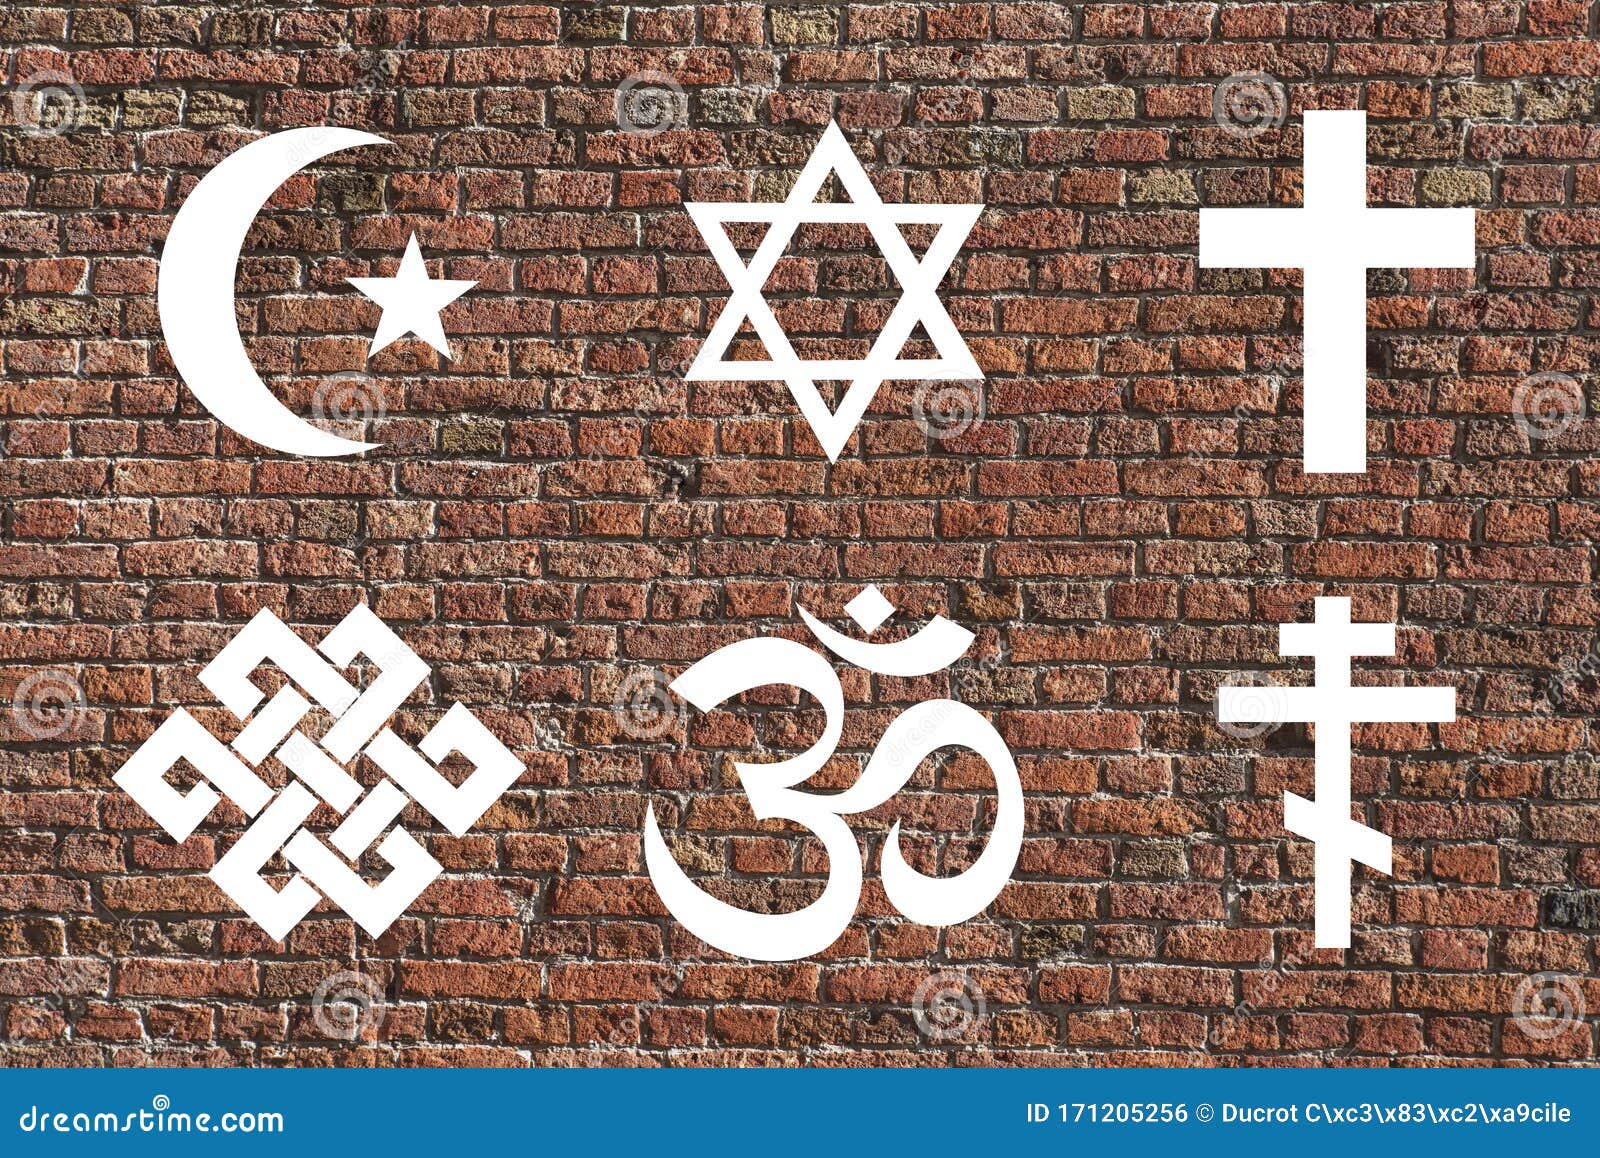  of different religions